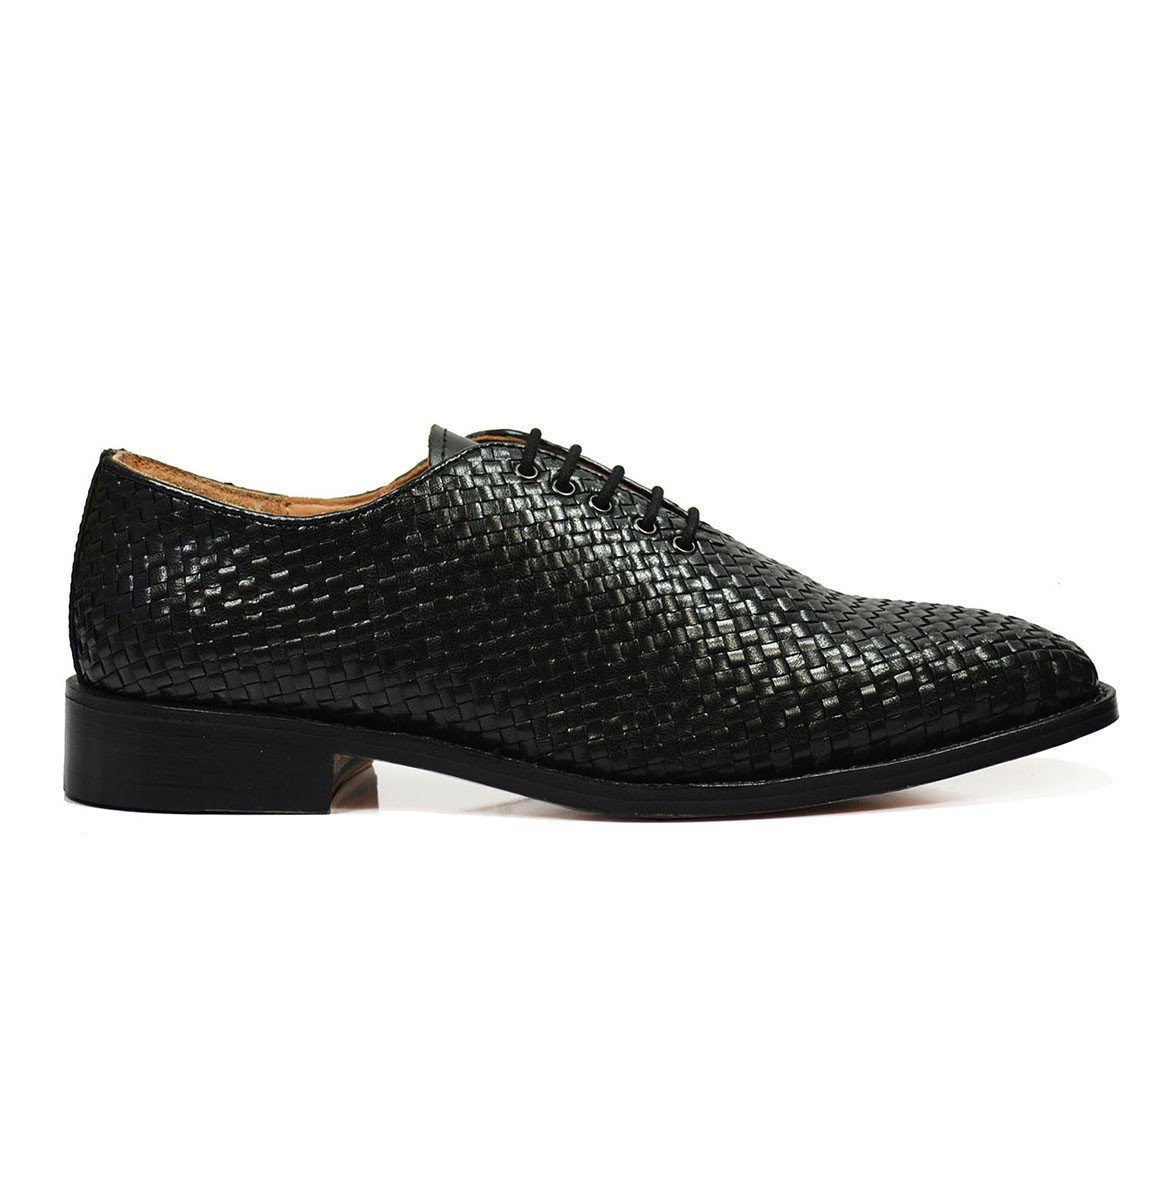 CALEB Full Leather Black Woven Oxfords by Paul Malone | Paul Malone